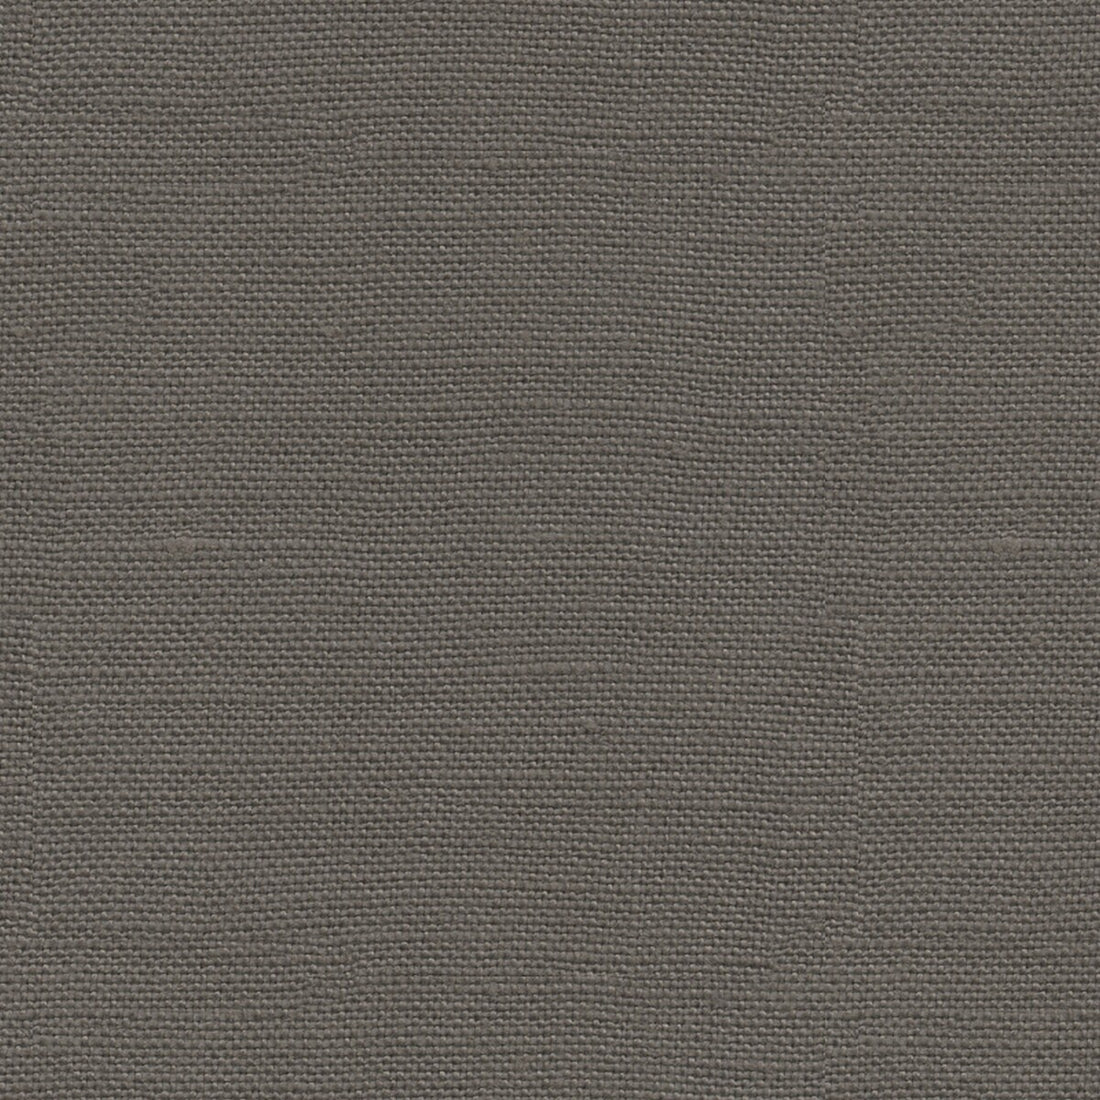 Lea fabric in graphite color - pattern J0337.950.0 - by G P &amp; J Baker in the Crayford collection